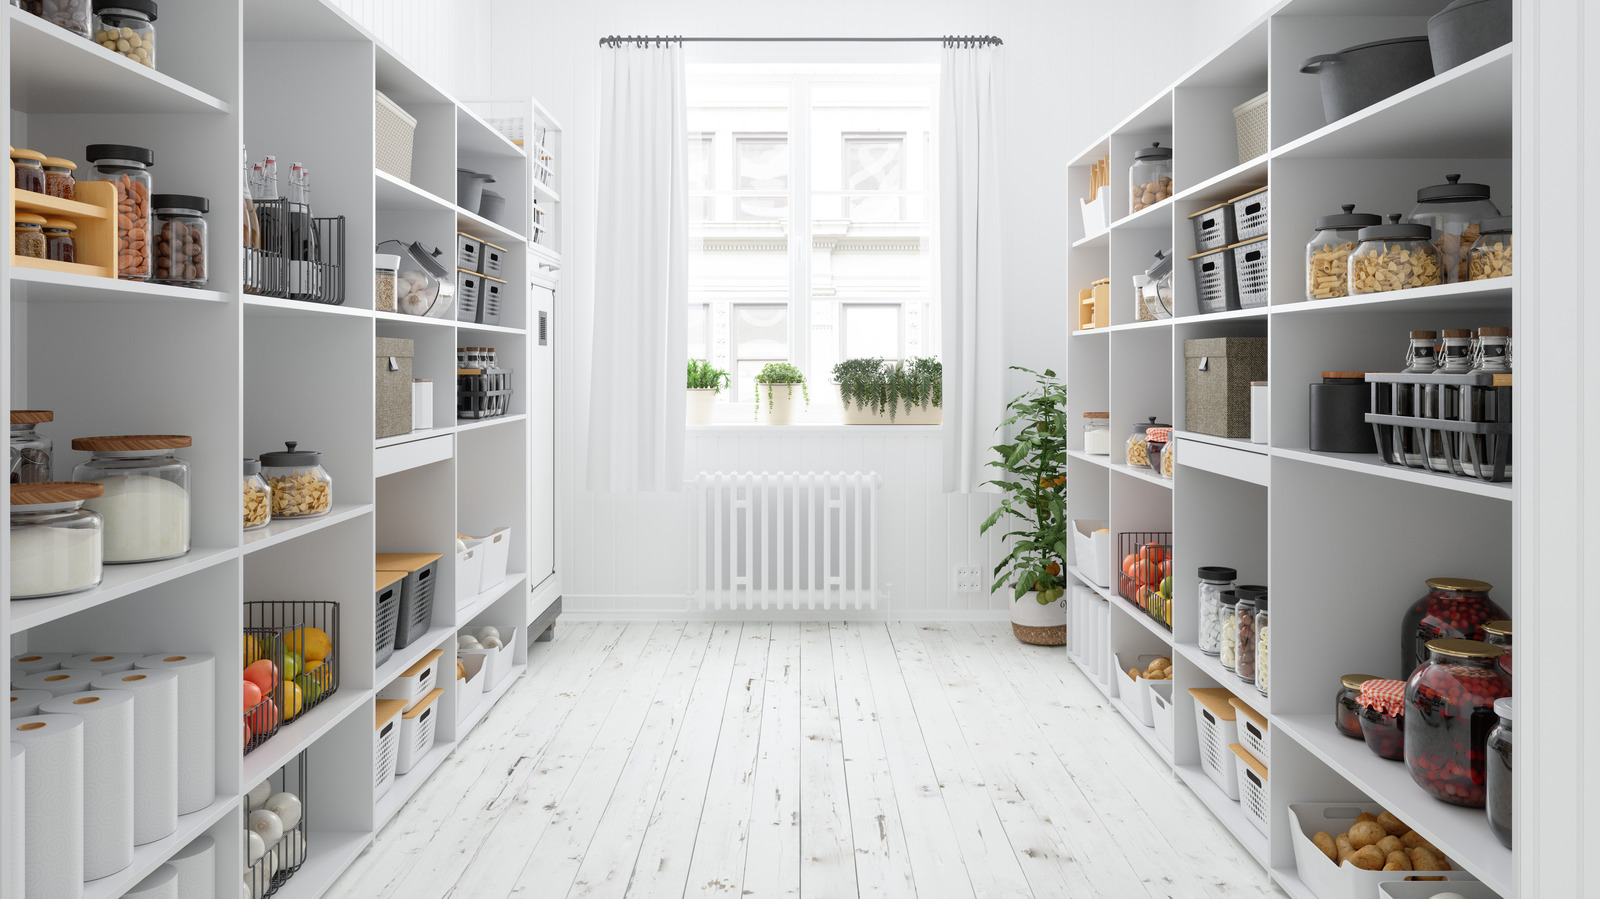 Kitchen Organization With Smart Sliding Shelves for Pantry